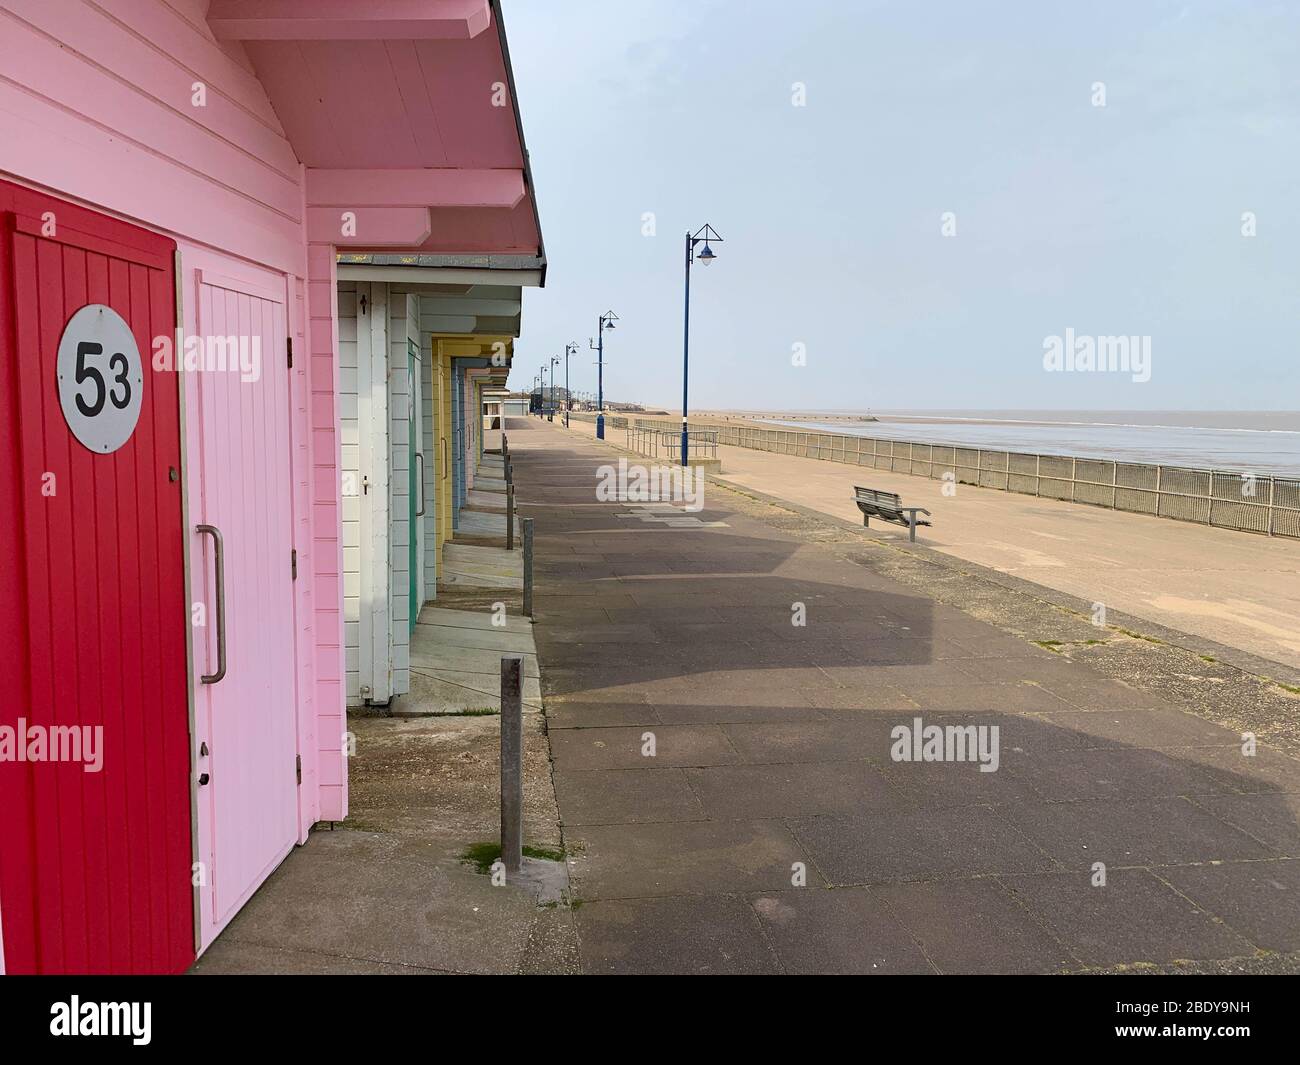 Mablethorpe, Lincolnshire,  UK. 10th April 2020. The deserted South Beach seaside promenade and beach huts of Mablethorpe, usually full of day trippers on a Good Friday. Credit: Tim Ring/Alamy Live News Stock Photo